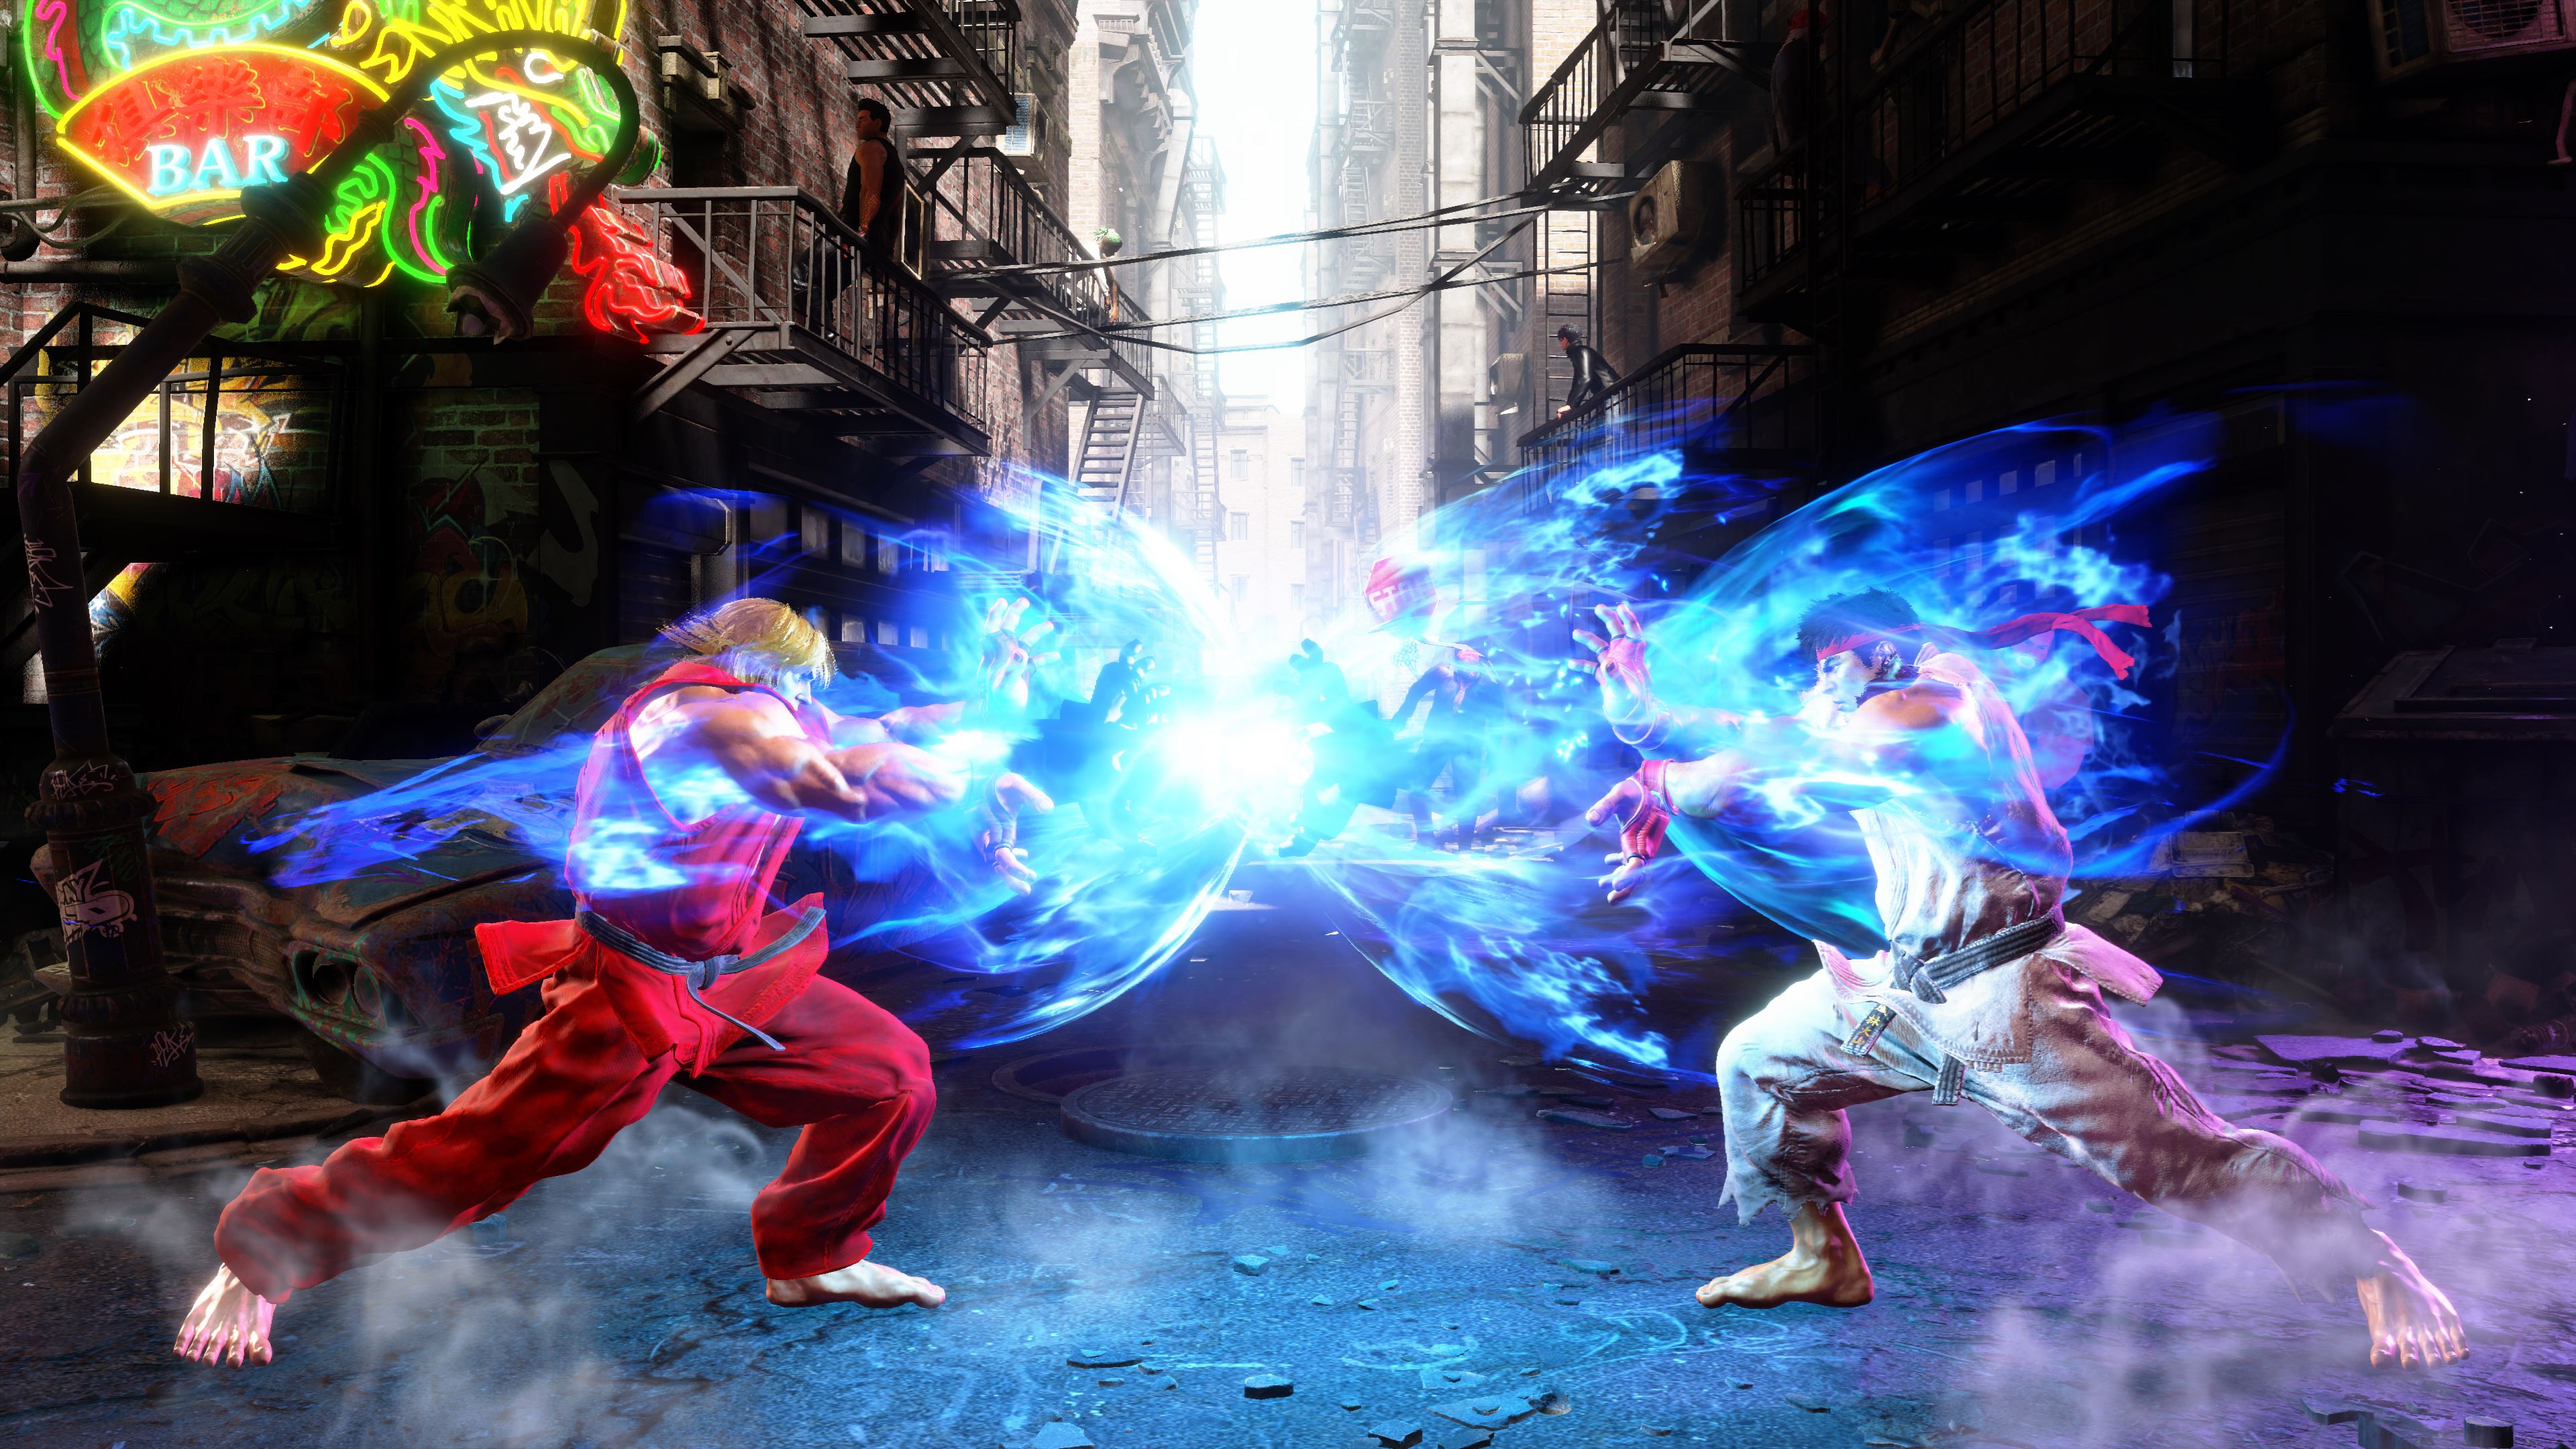 Ken and Ryu in their classic gi costumes throw a hadouken fireball at each other in a screenshot from Street Fighter 6